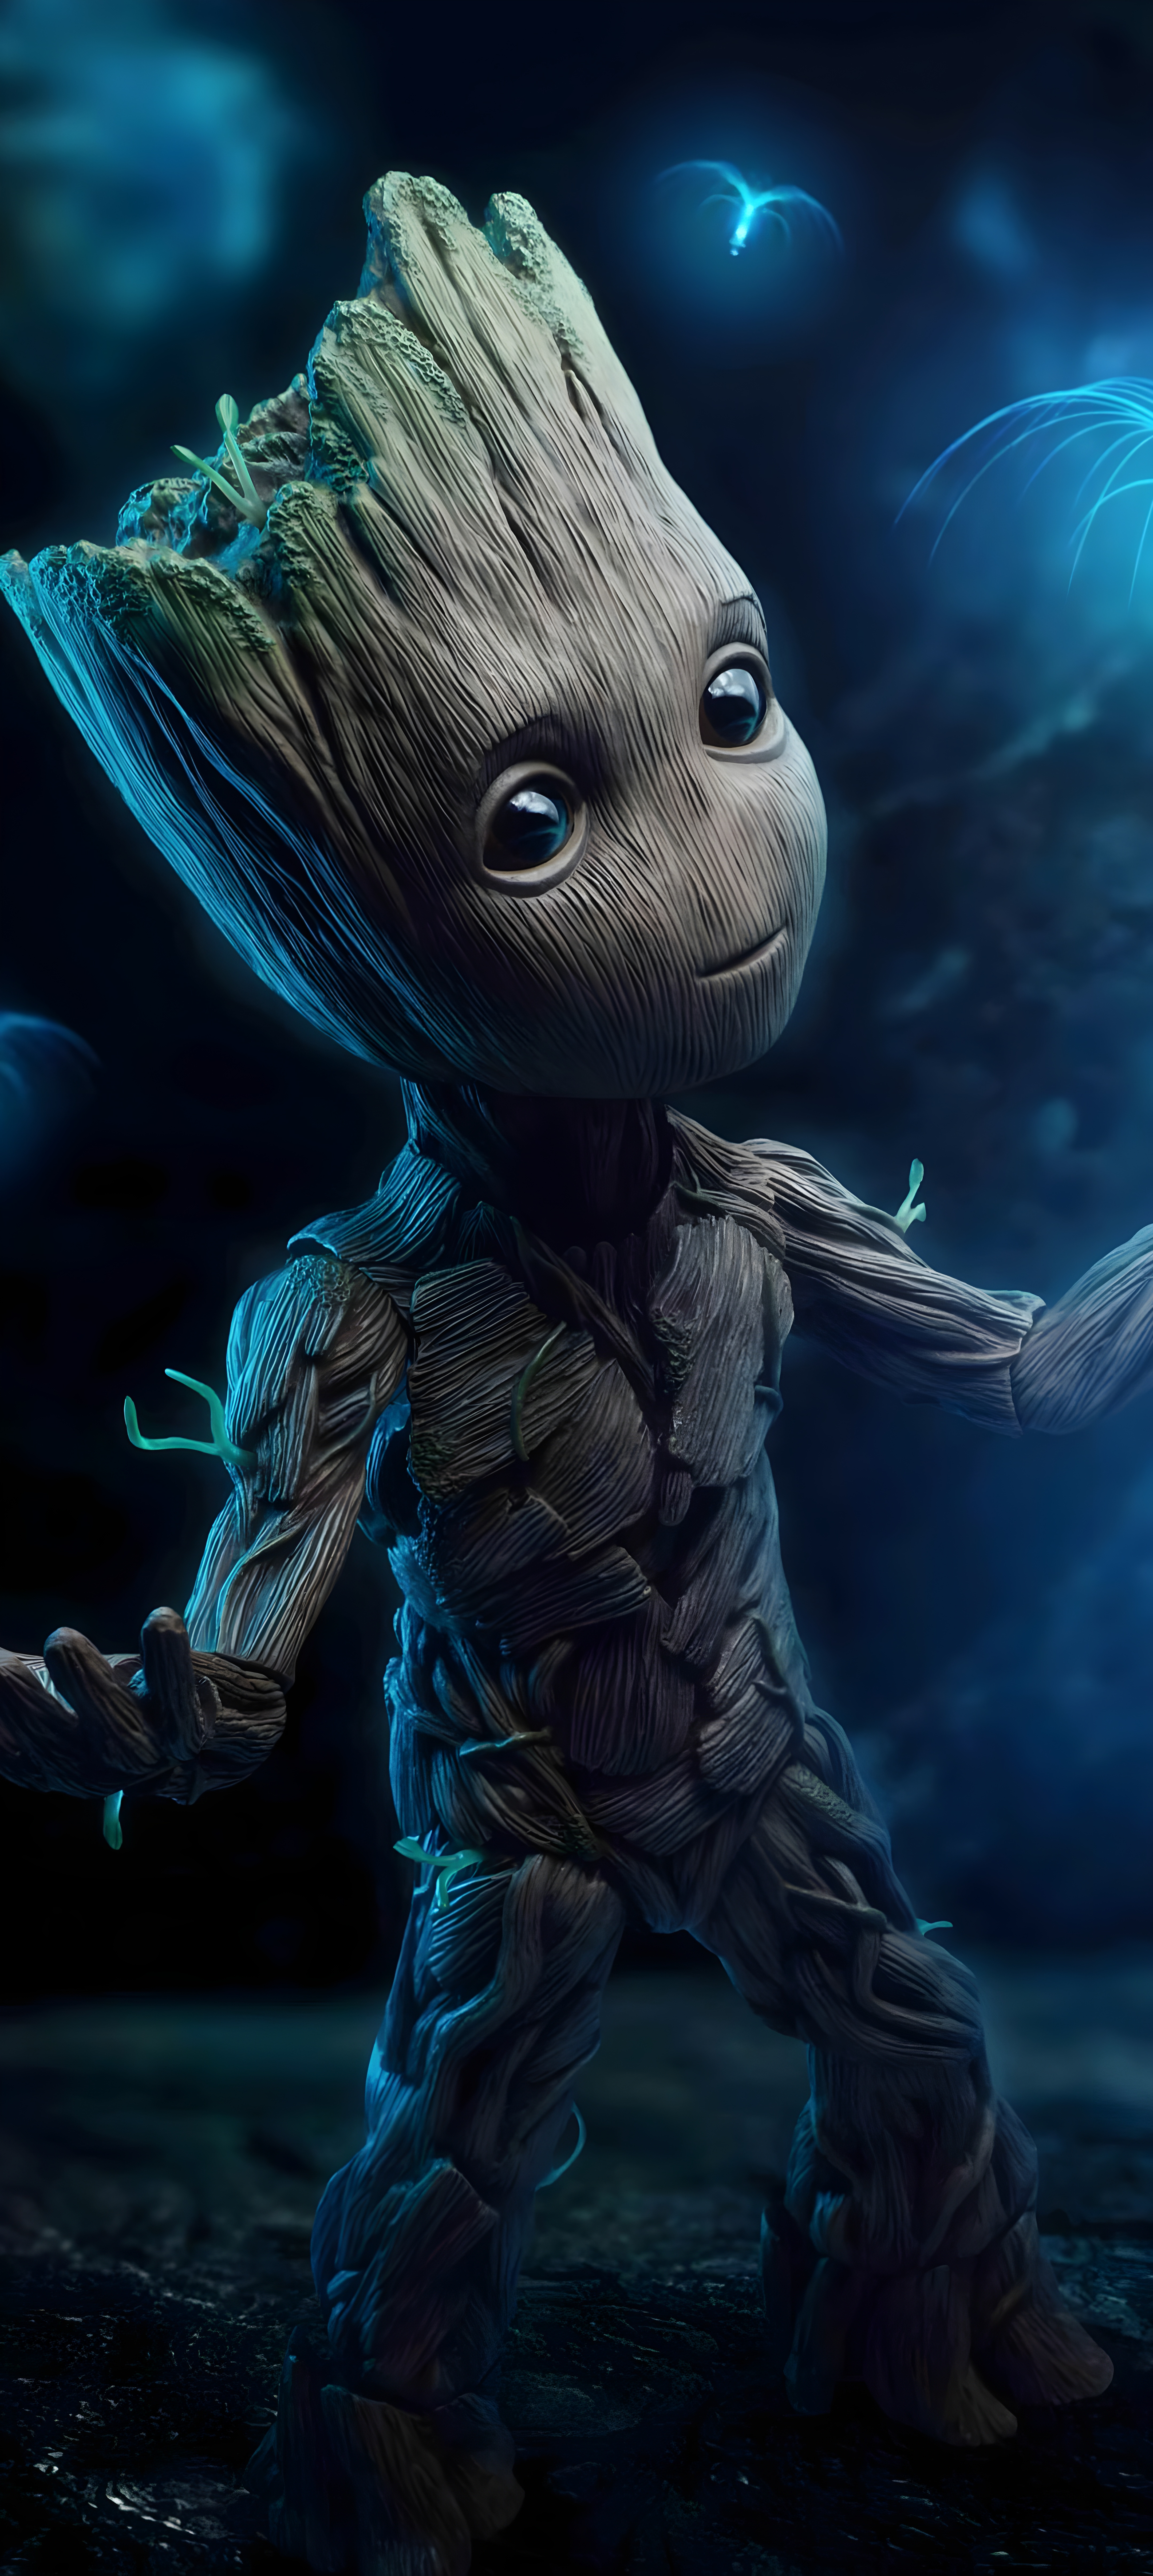 Wallpaper cinema movie film artwork Guardians of the Galaxy Groot  Baby Groot images for desktop section фантастика  download